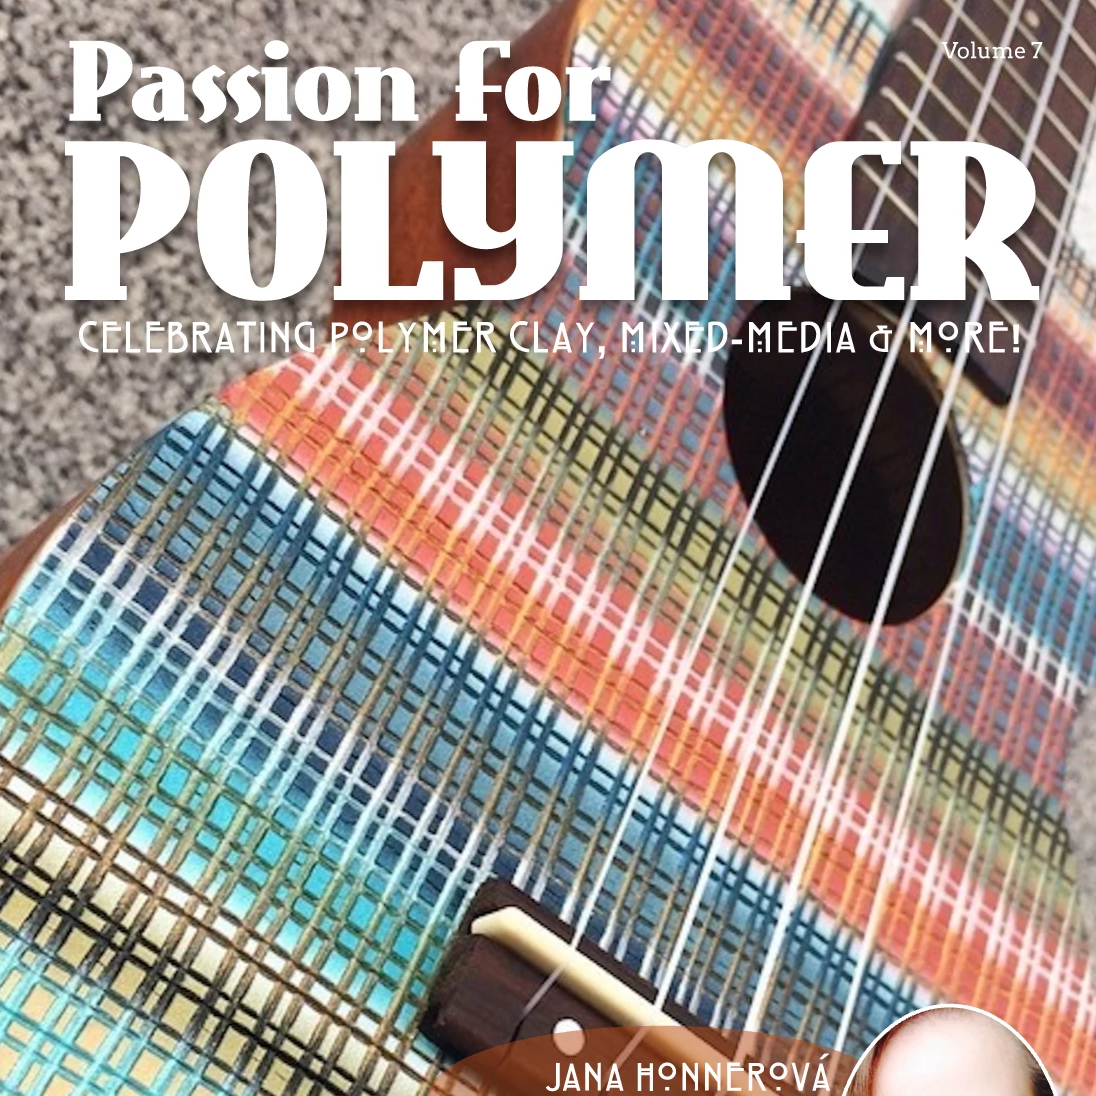 DIGITAL October 2019 Passion for Polymer clay magazine mixed media pdf download - Polymer Clay TV tutorial and supplies